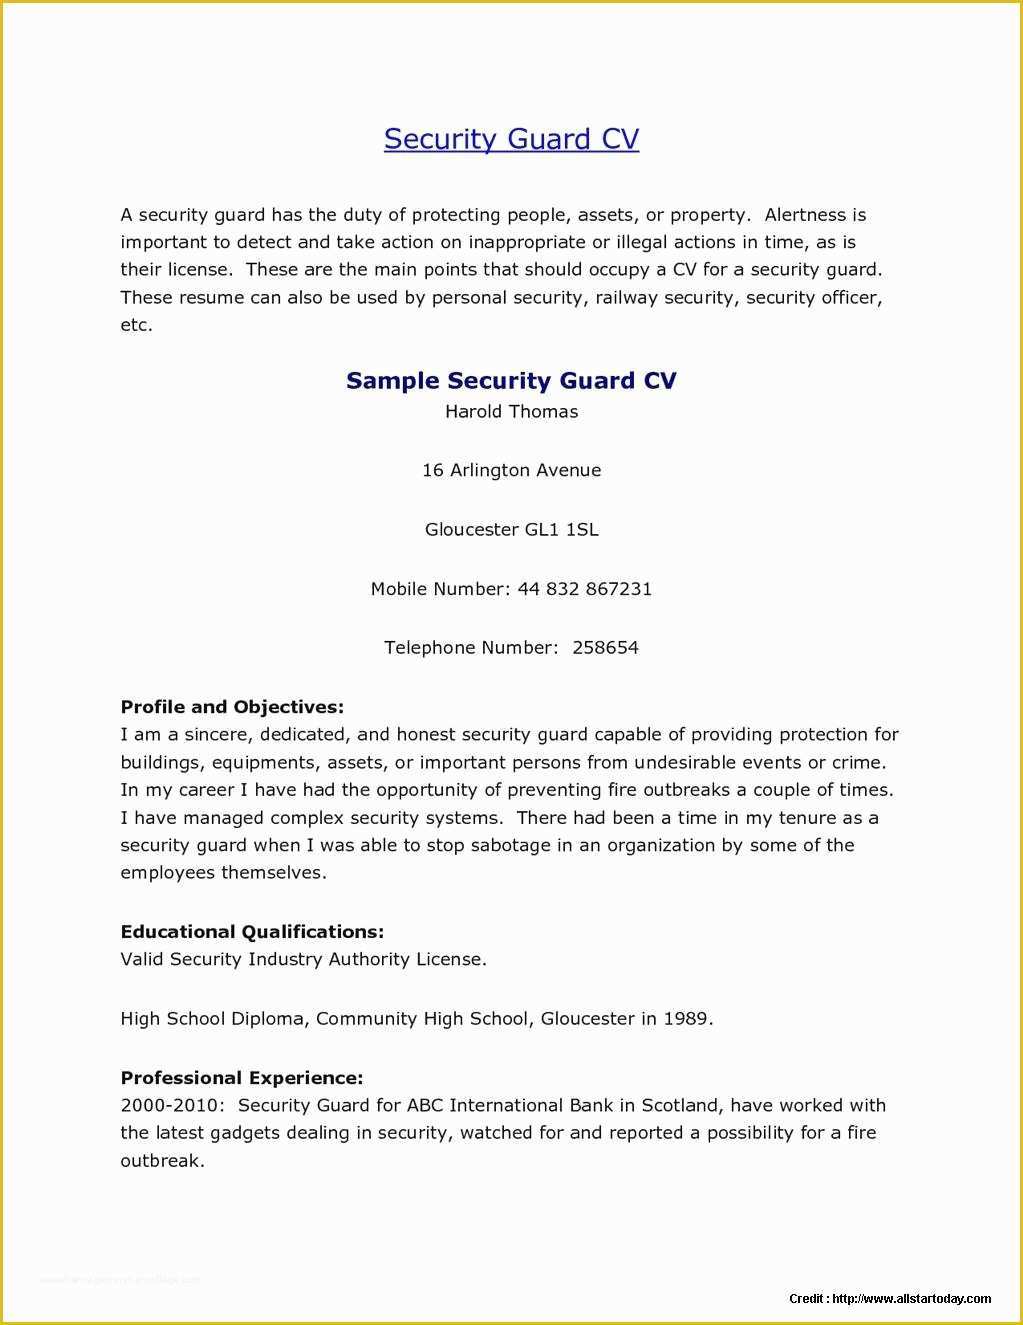 Security Resume Template Free Of Sensational Security Guard Resume Template Templates Entry